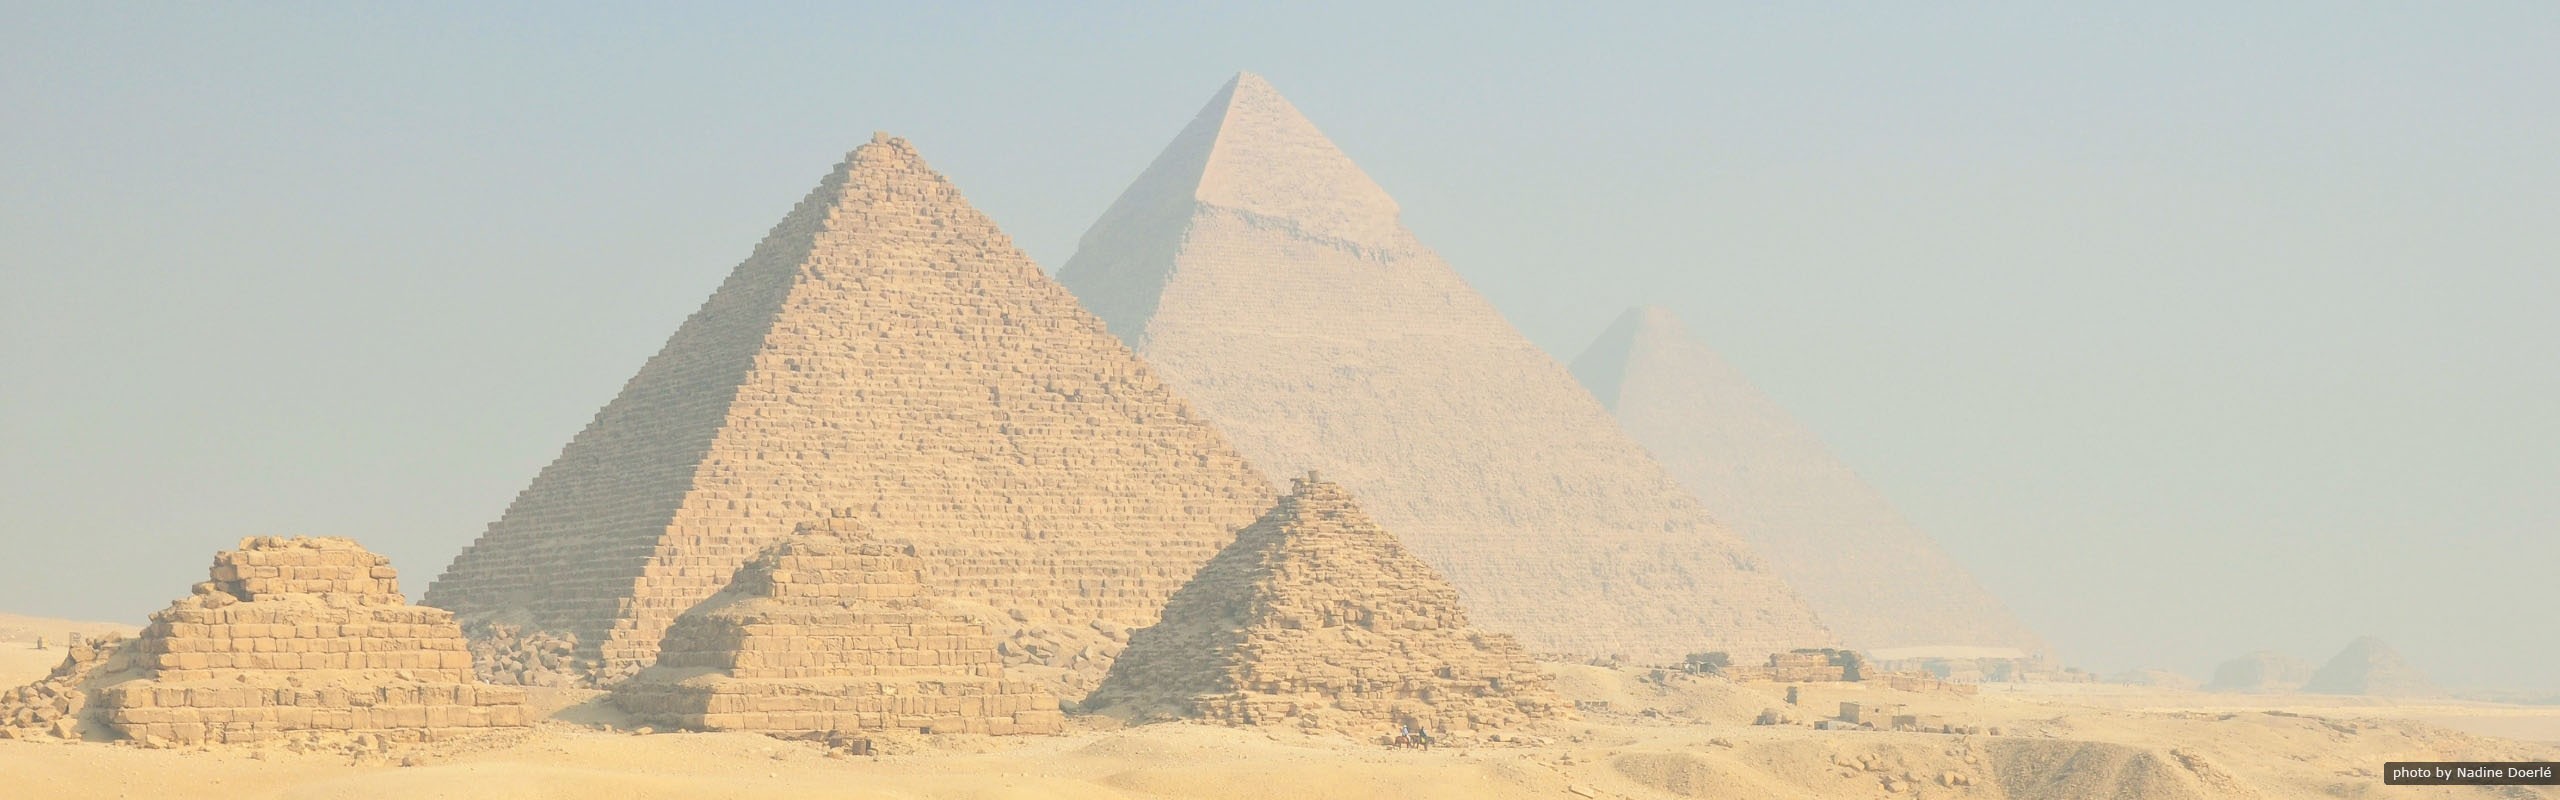 How to Travel from Cairo to Giza: Taxi, Bus, or Private Transfer?